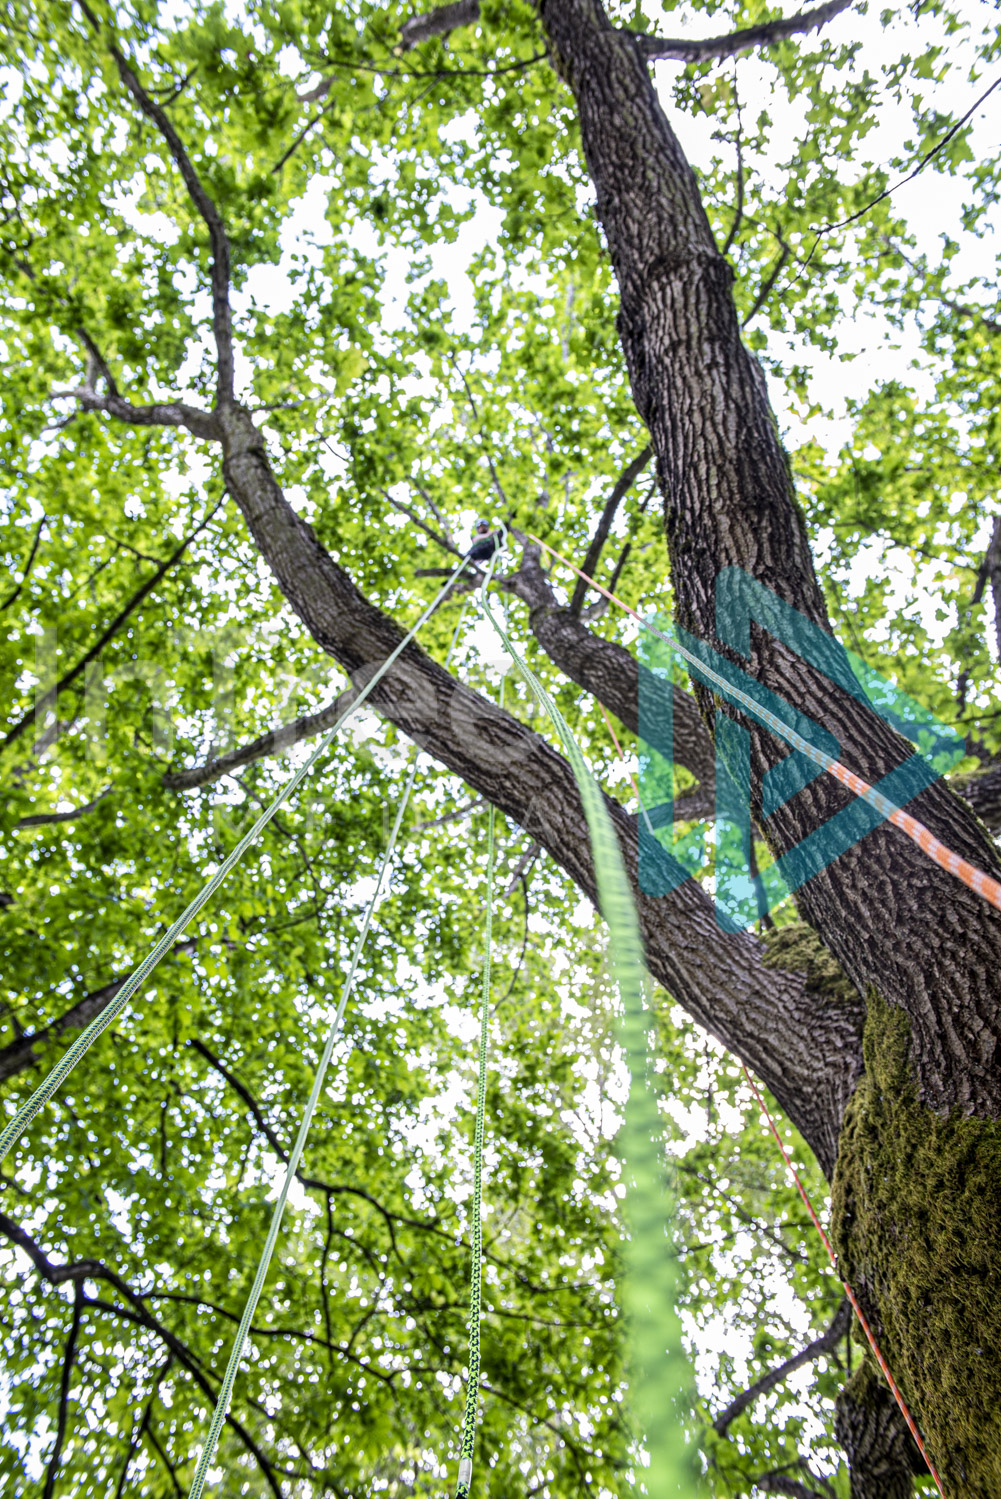 Looking up ropes to a Climbing arborist in tree - Arborist Stock Photo 001-21-7251